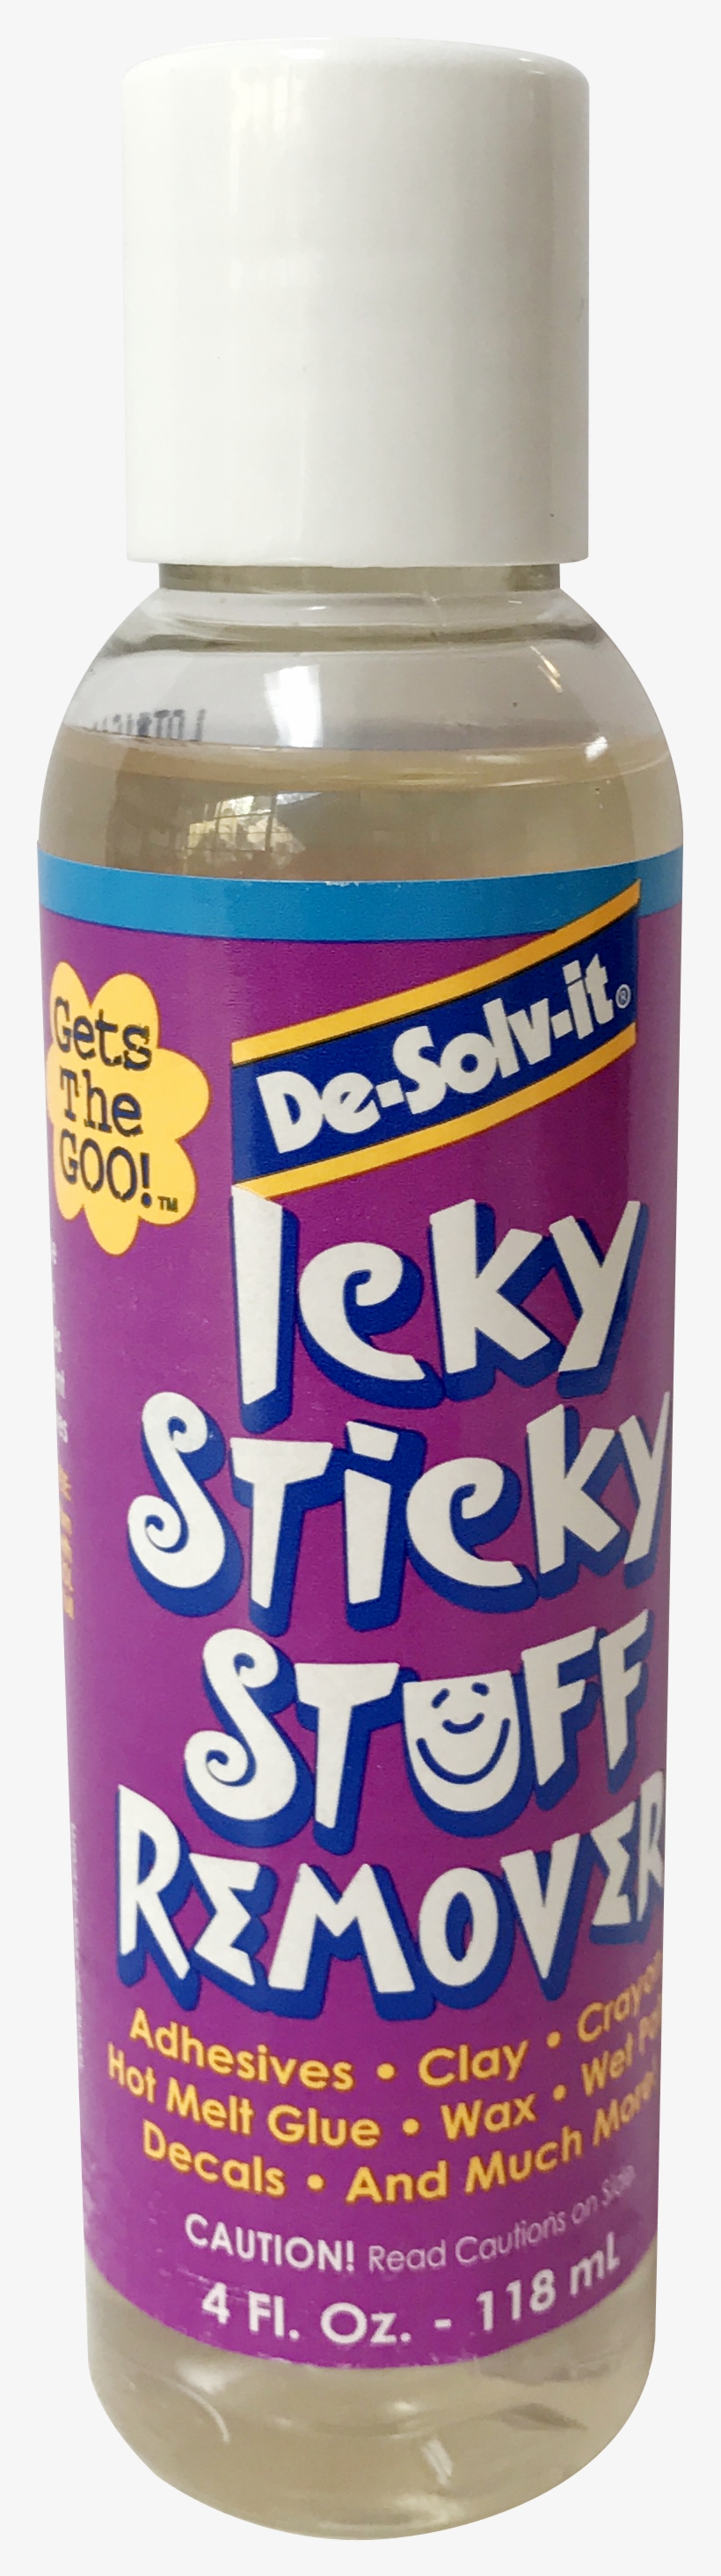 De Solv It Icky Sticky Stuff Remover For Fastback Binders - De-solv-it Icky Sticky Stuff Remover 4oz - 2 Pack, transparent png #3866947